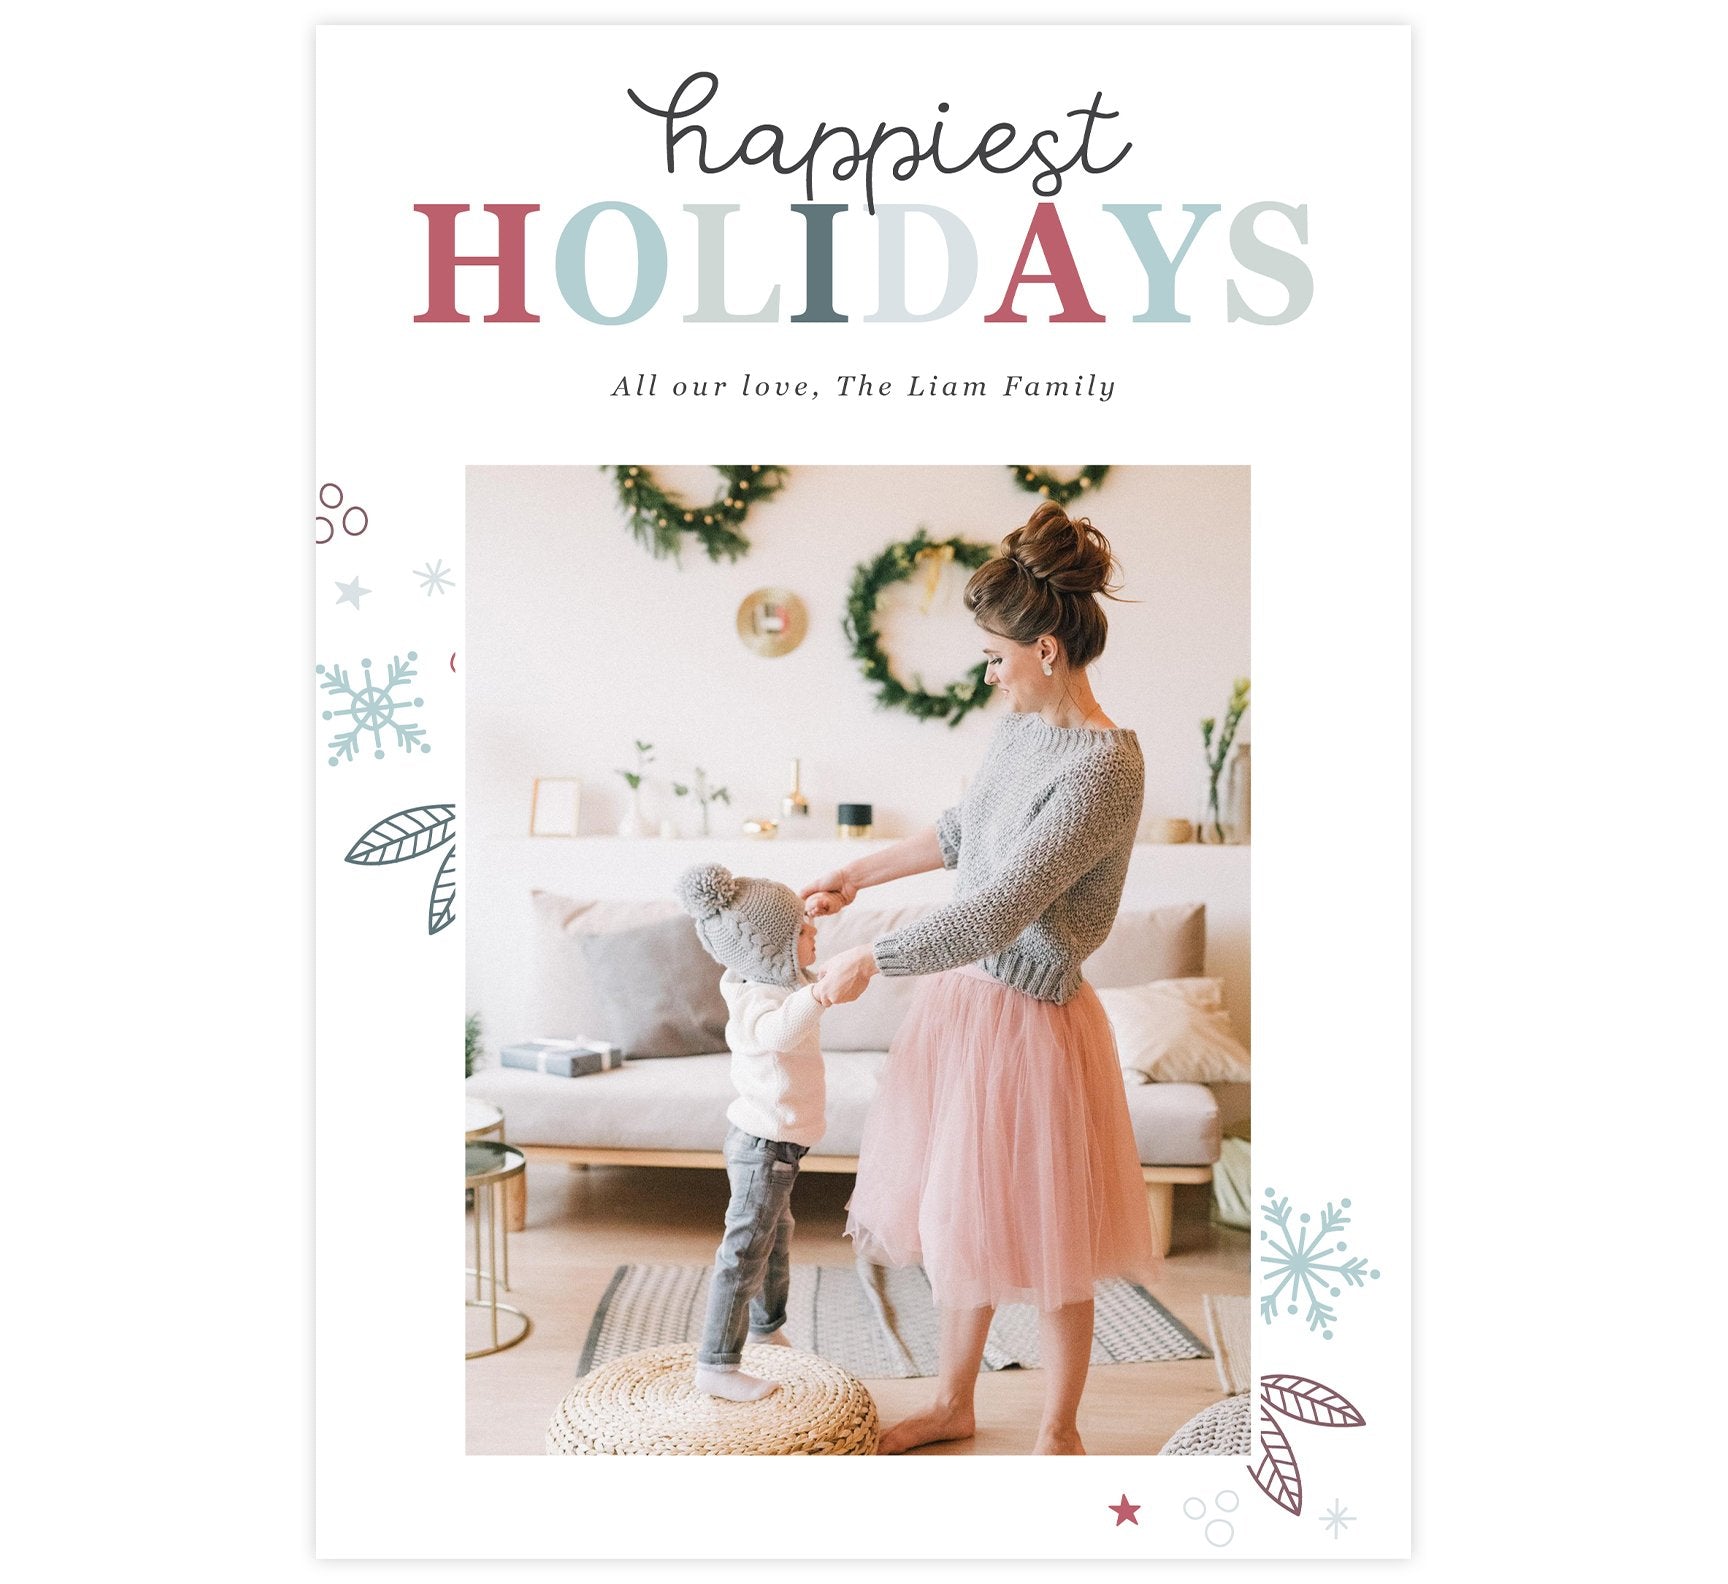 Happiest Holidays Holiday Card; White background with "Happiest Holidays" at the top, image in the middle and simple drawn snowflakes going behind the image. 